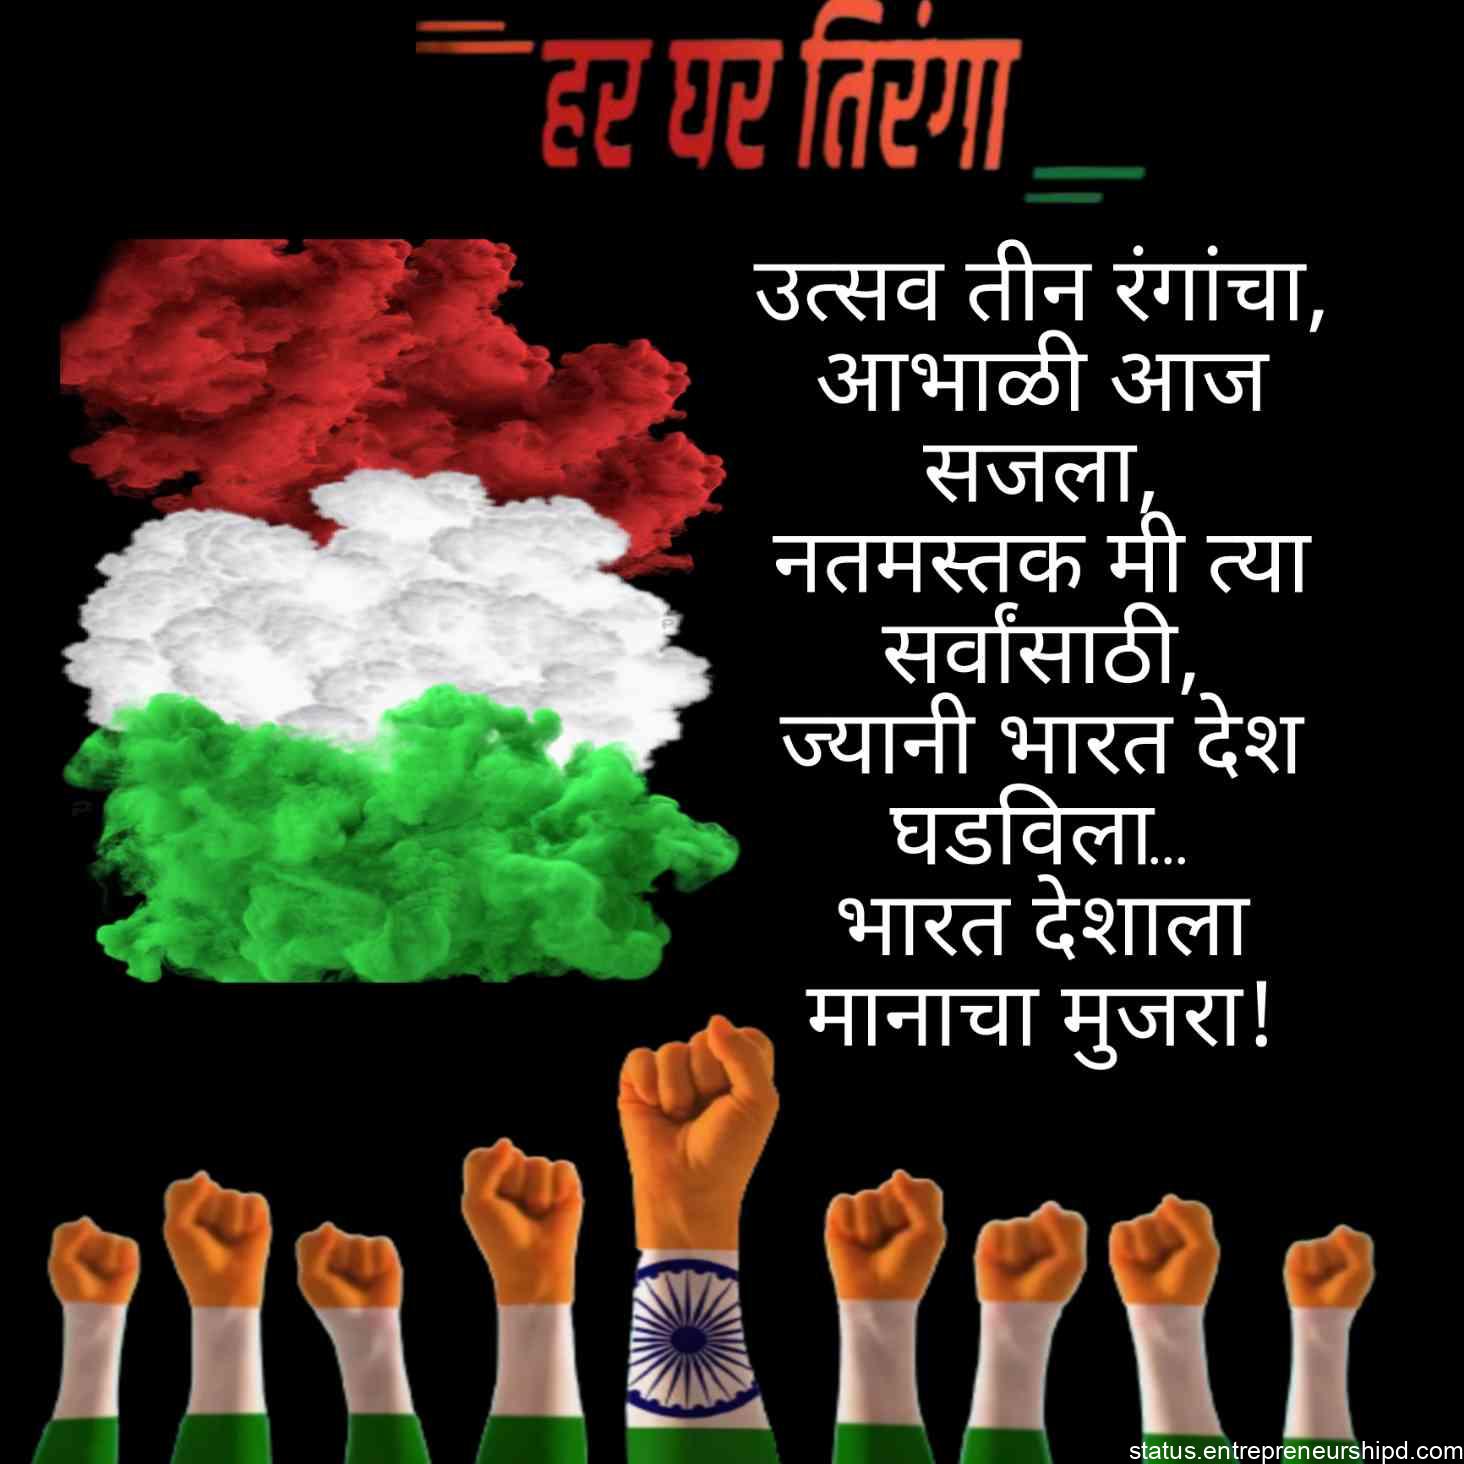 Independence Day Suvichar and message and Shayari In Marathi